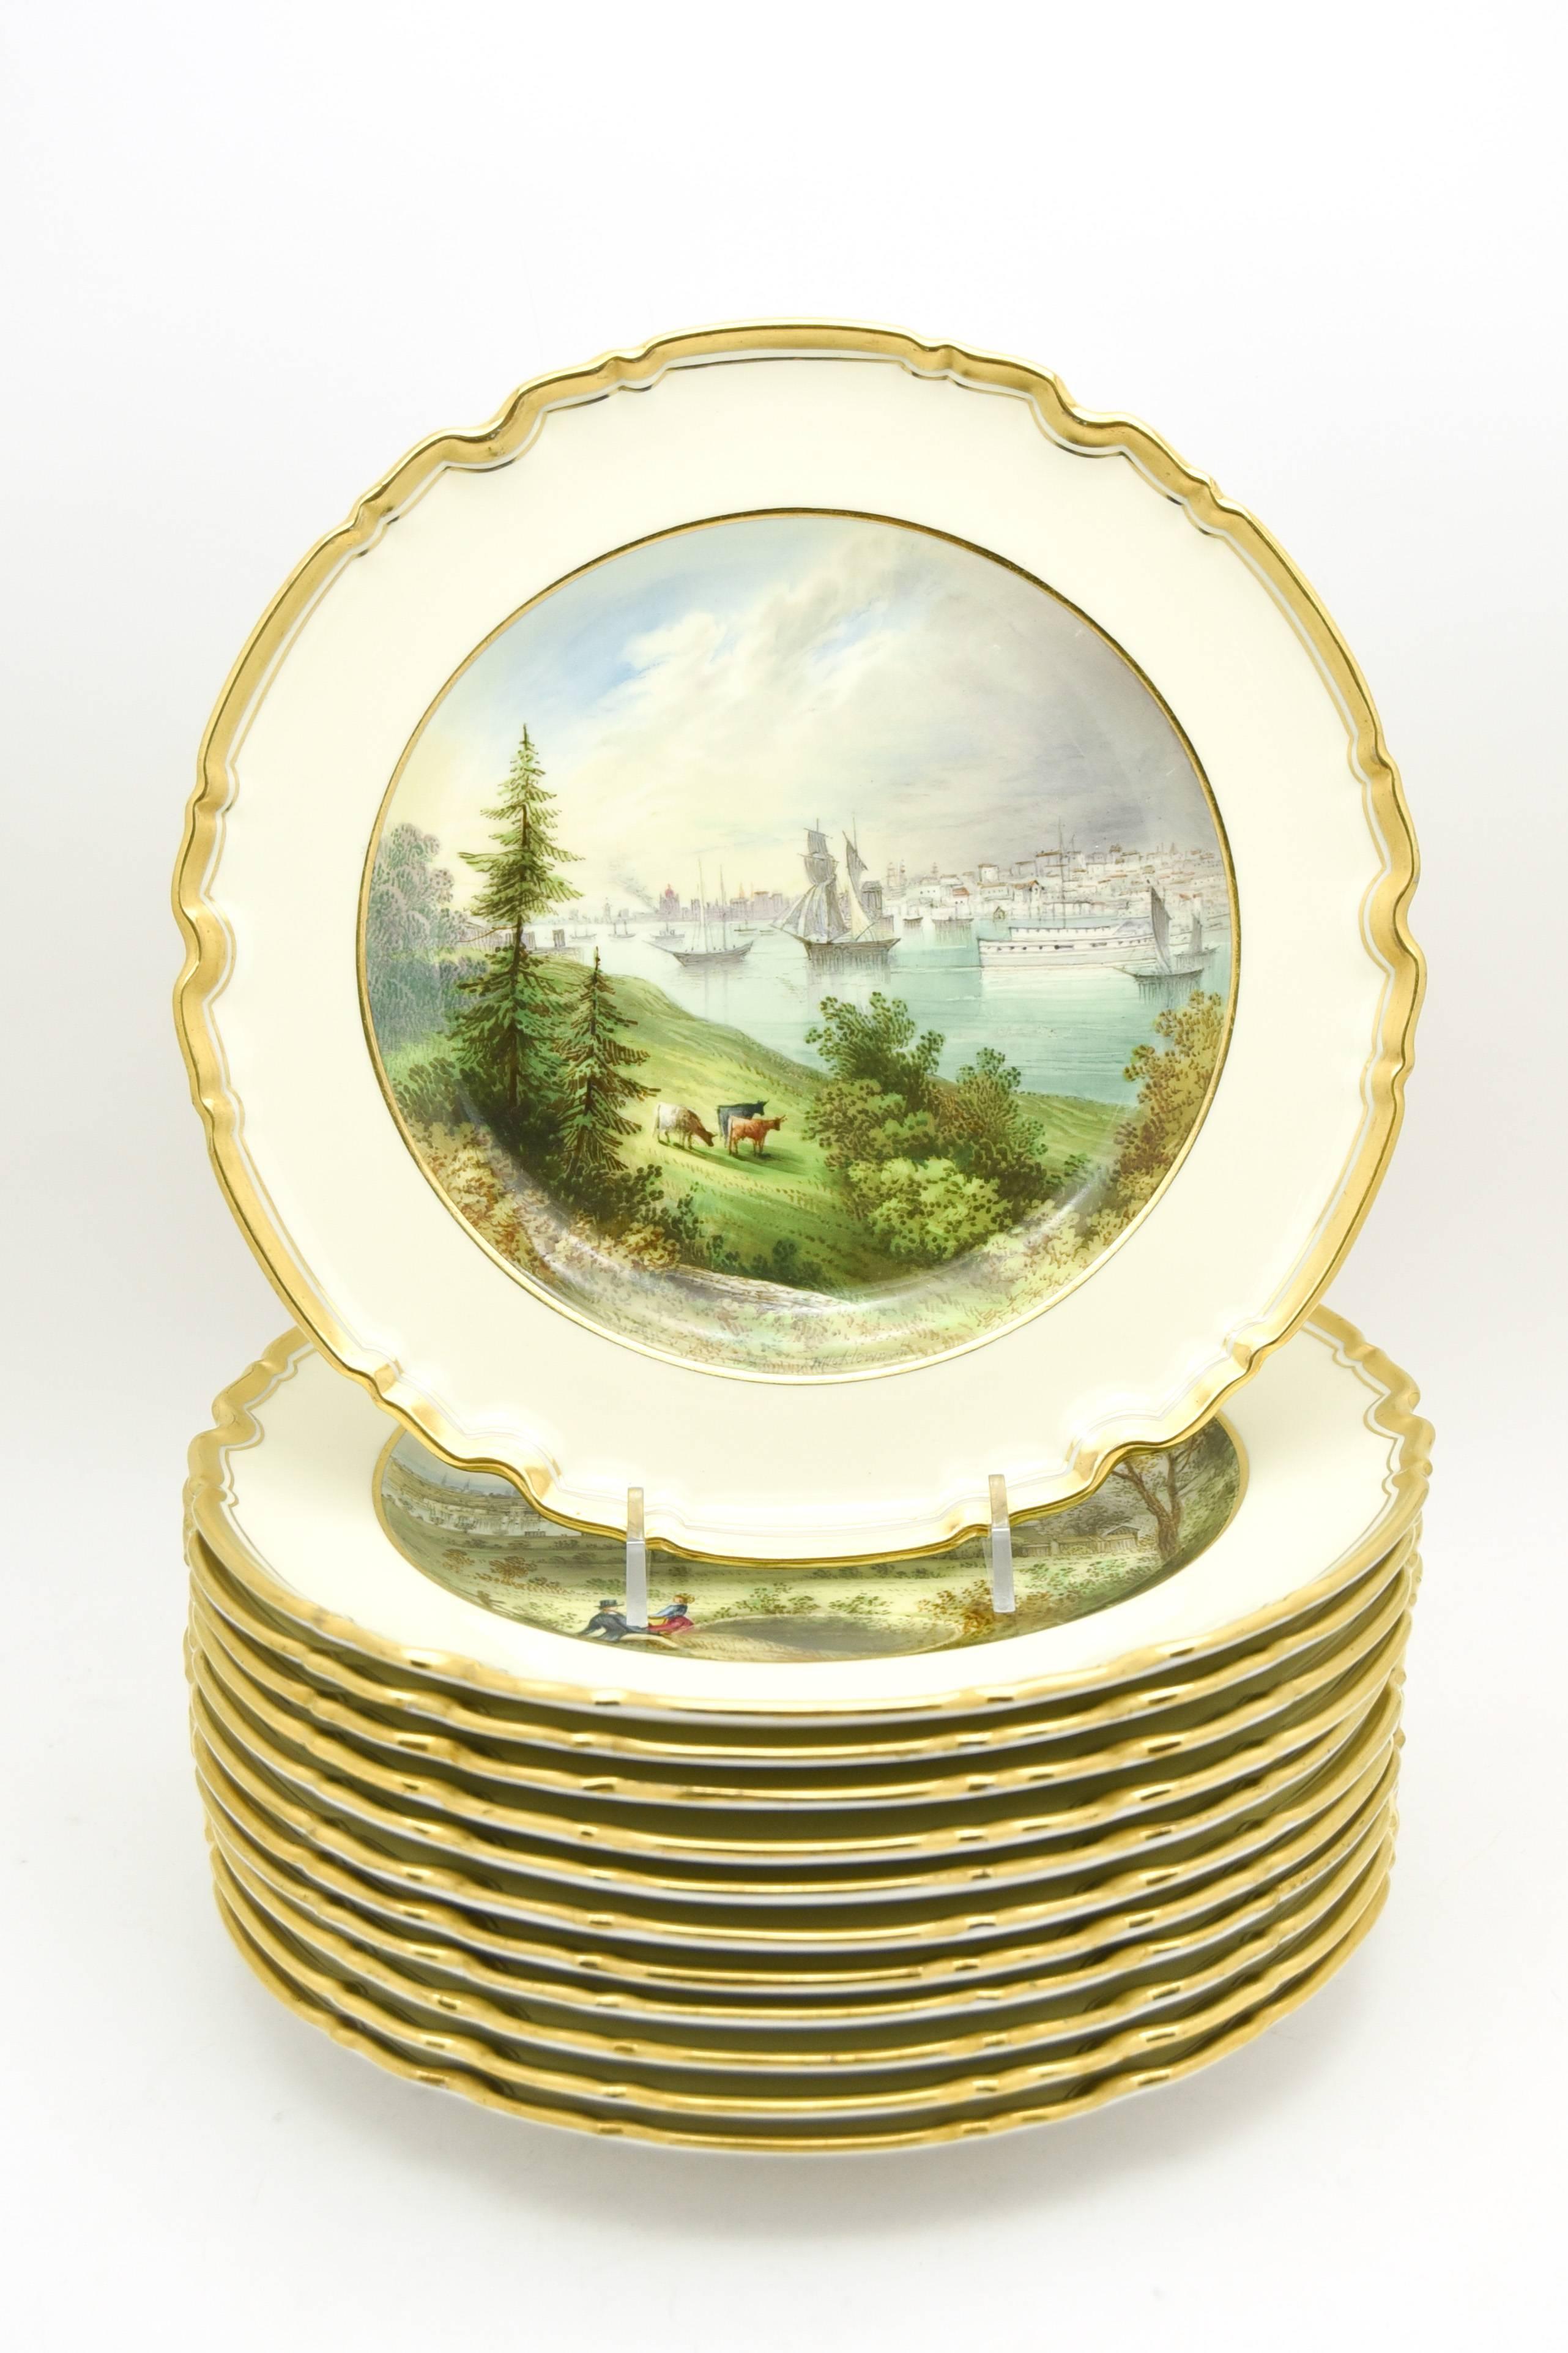 This set of 12 hand painted plates are unusual in that they depict scenes of freshwater related locations in America. Most scenic plates focus on European subjects and locales whereas the named places on this set are iconic. Each plate is named on